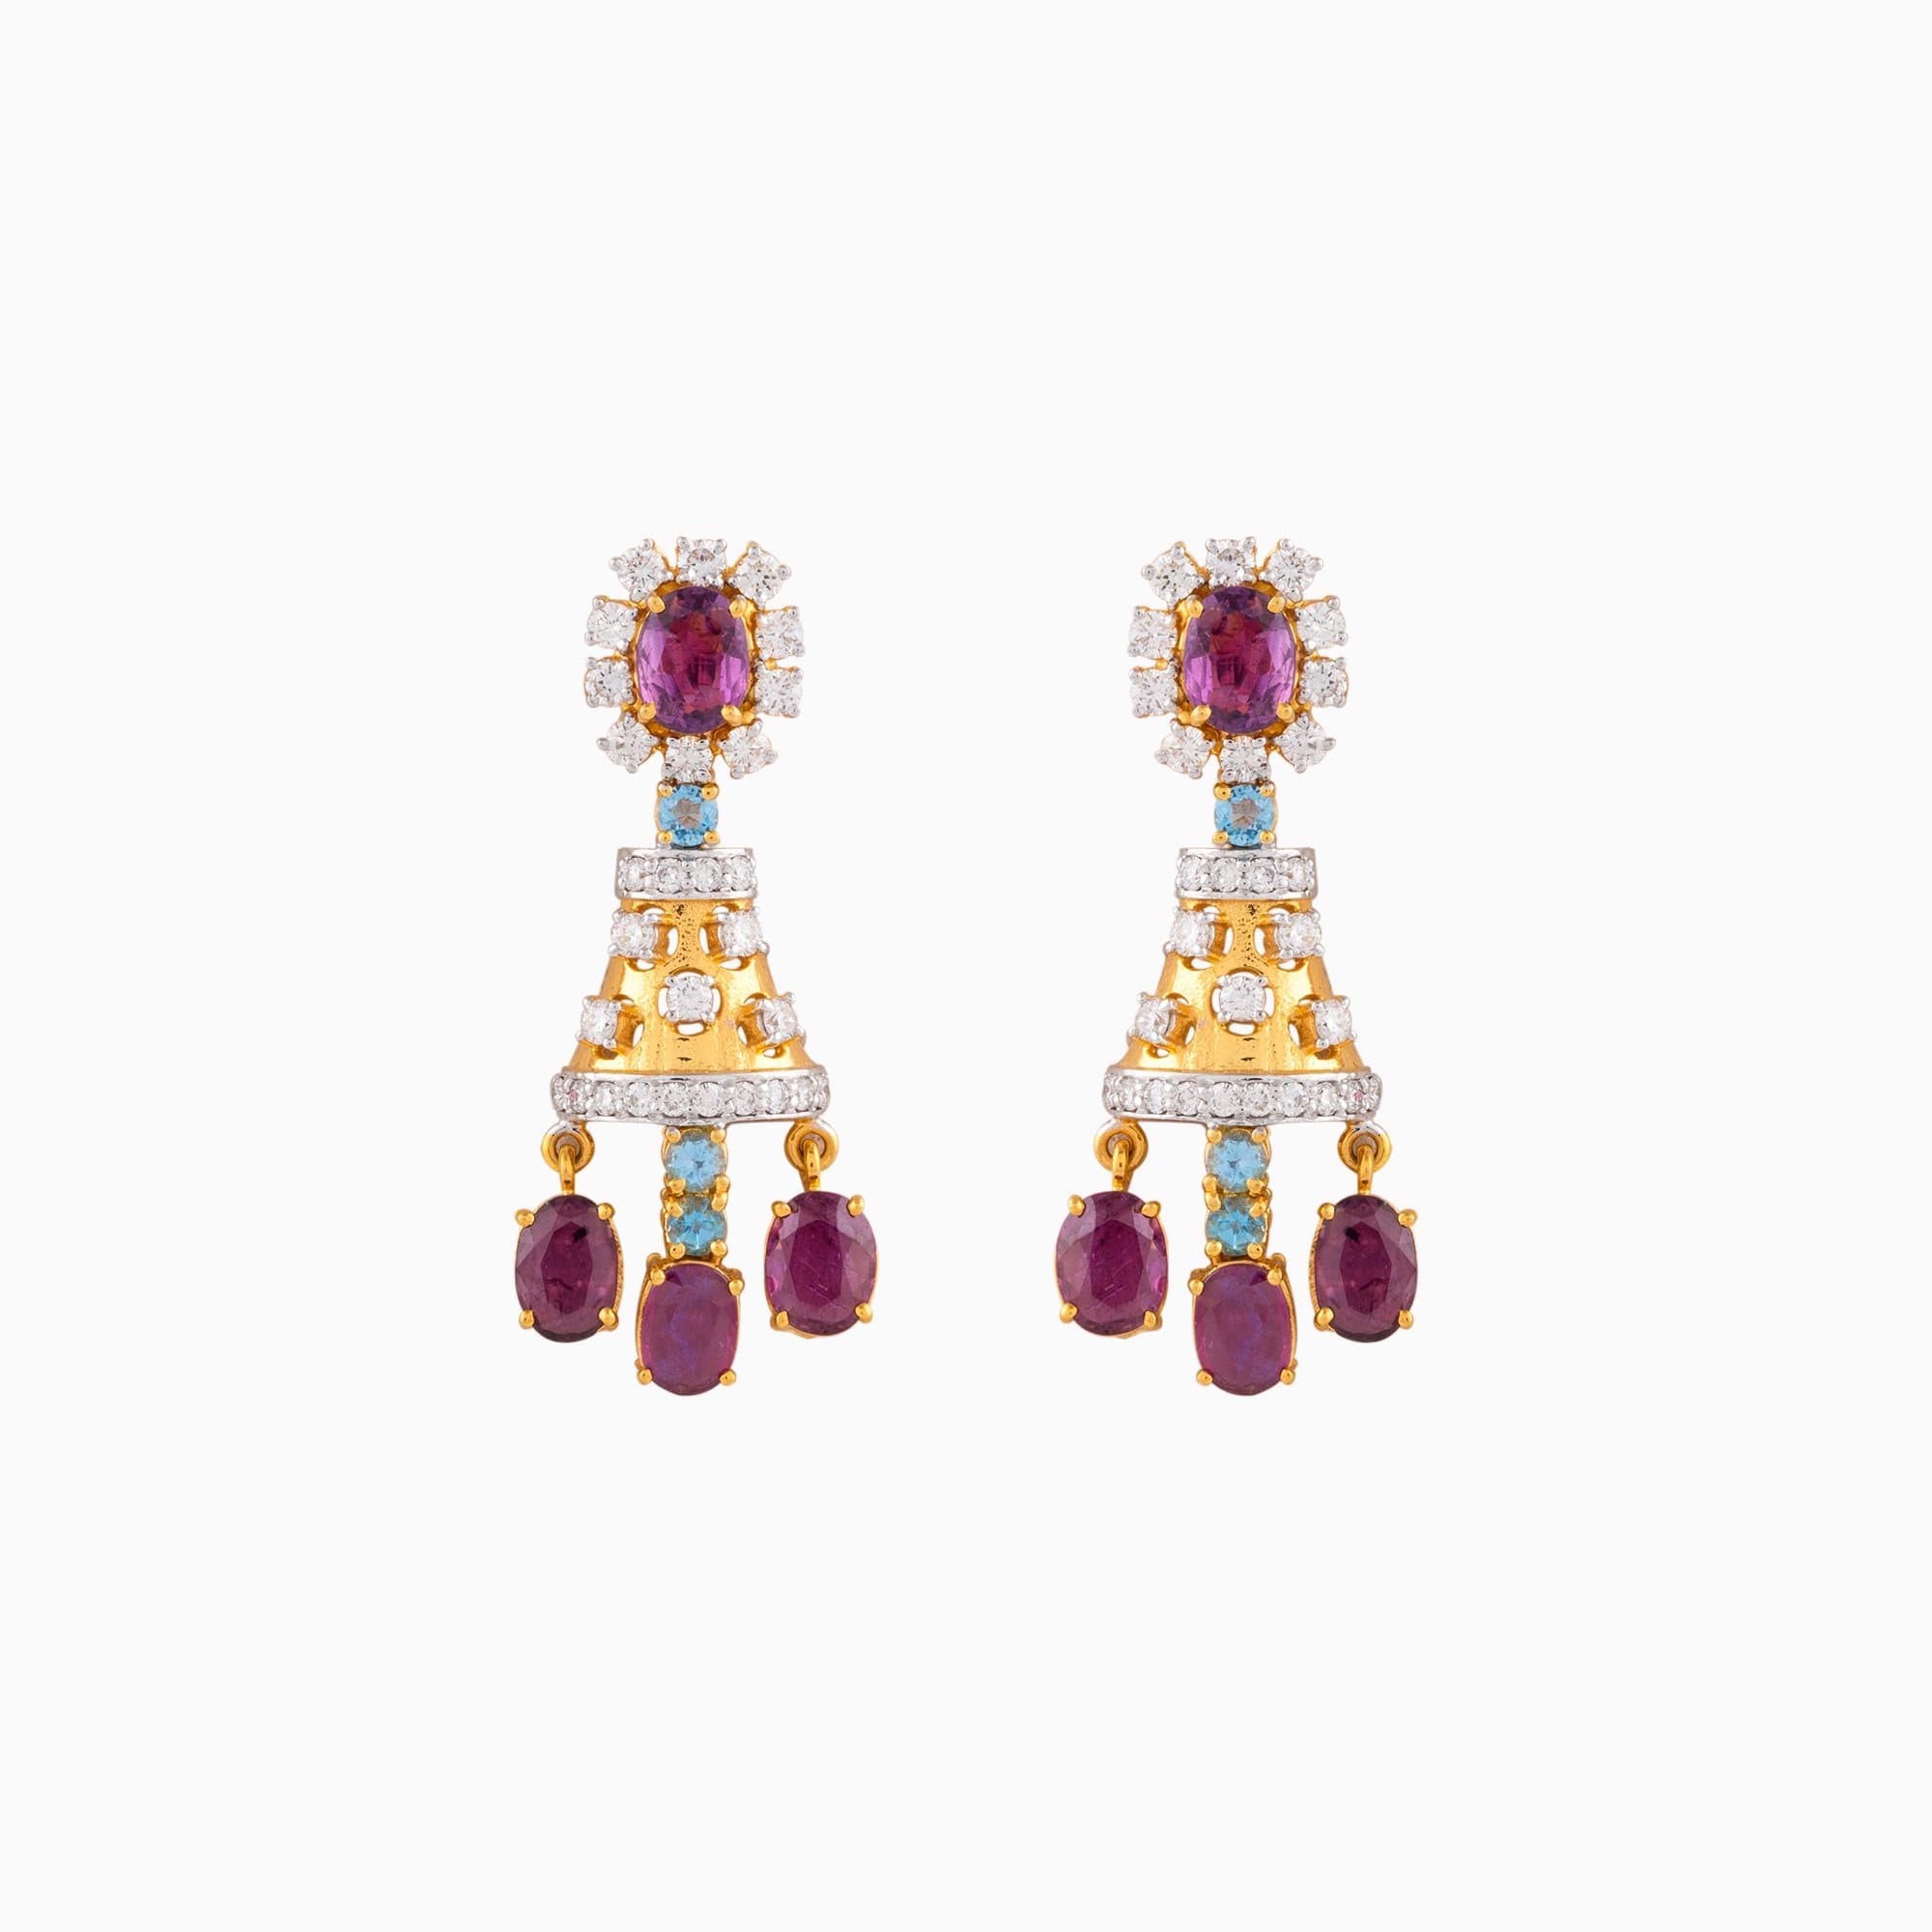 Earring Pair with Round Cut Diamond, Blue Topaz Stone and Oval Cut Ruby-WDN985